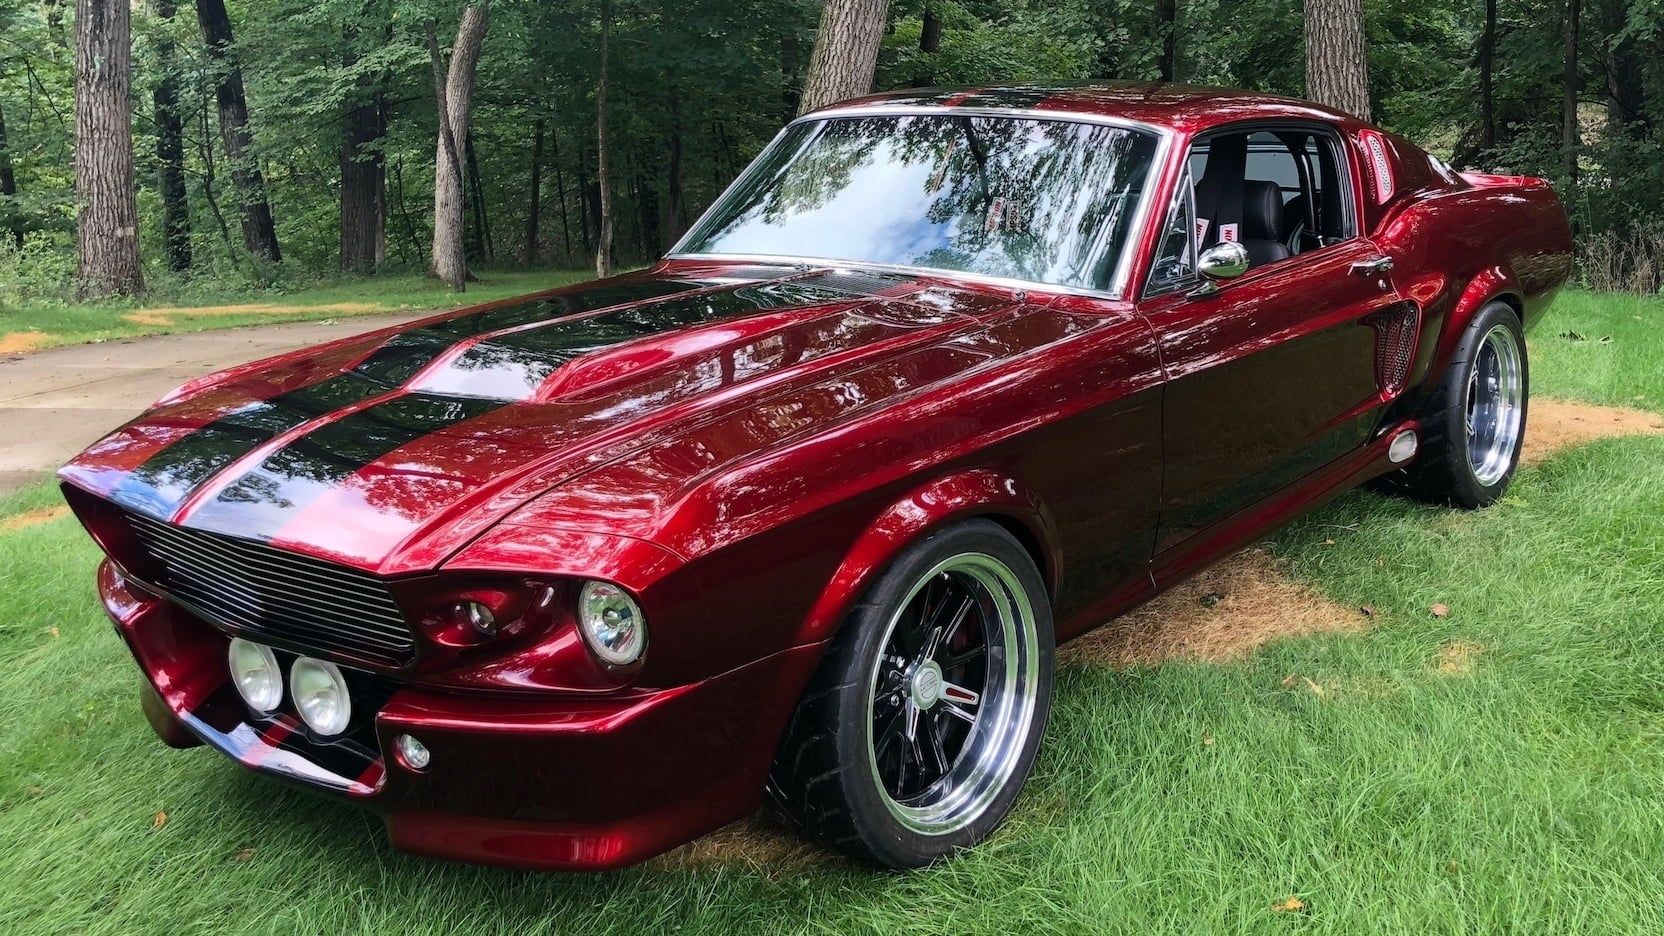 Red Mustang Shelby GT500 Eleanor